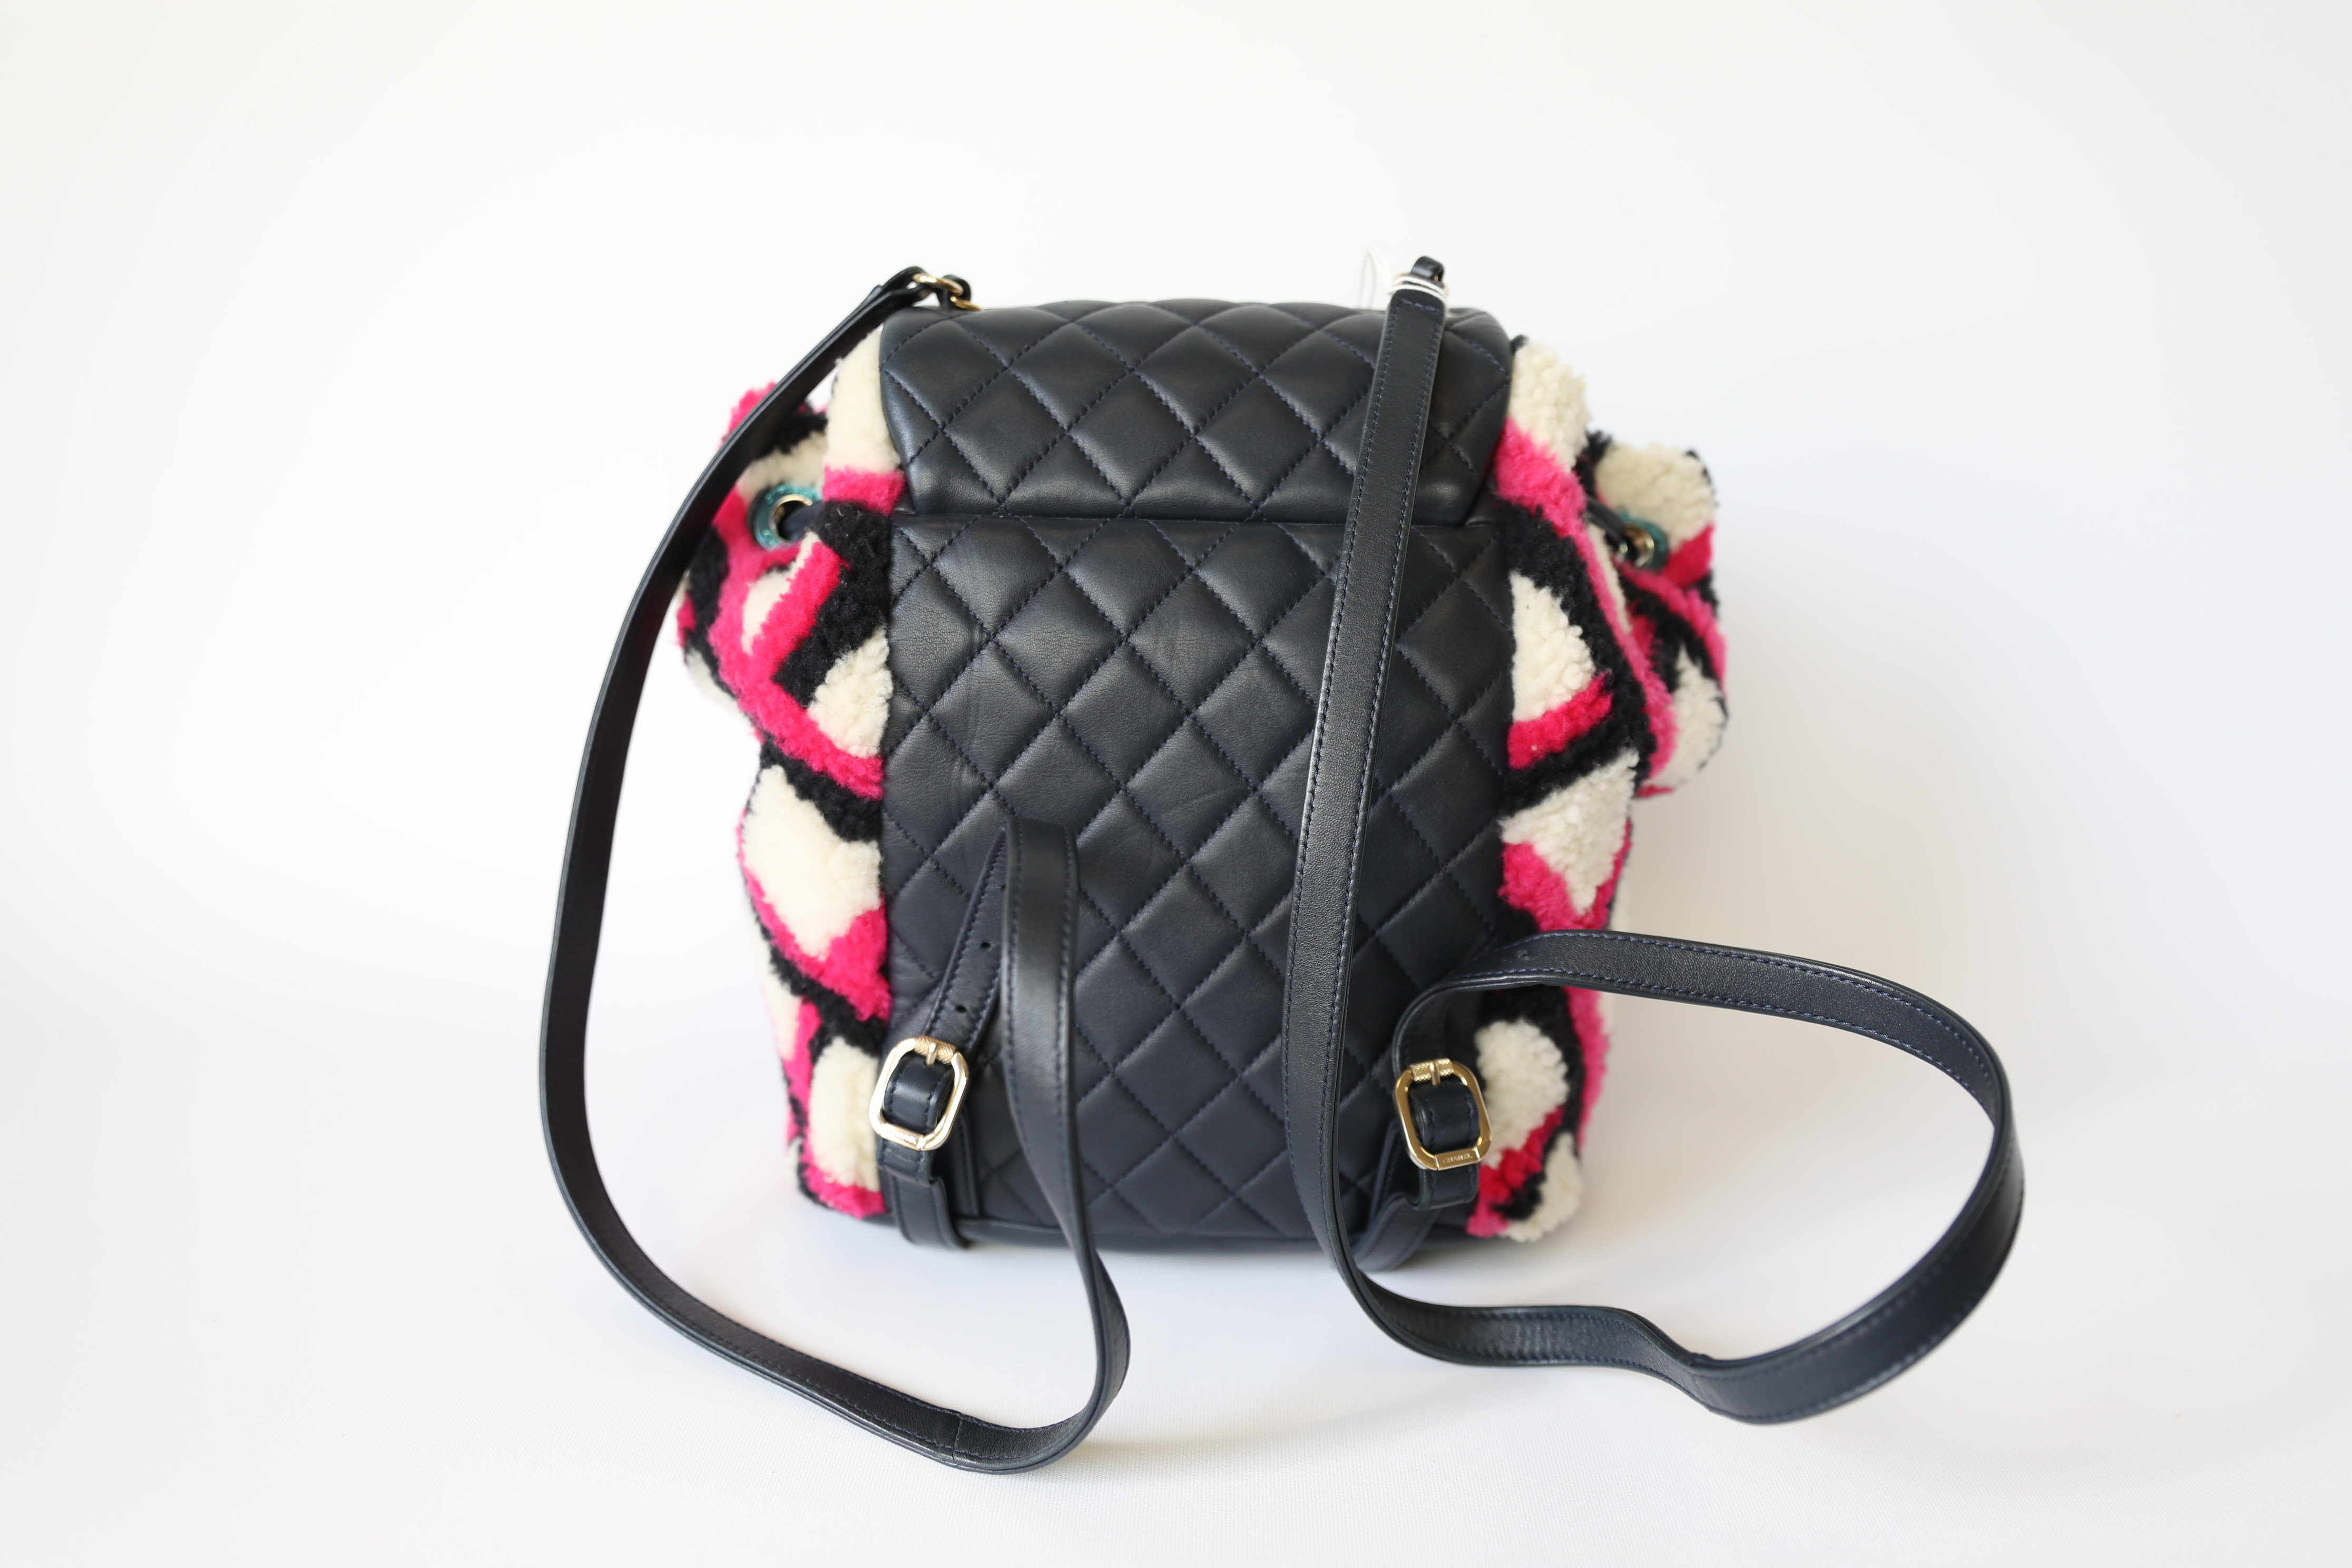 Chanel Urban Spirit Backpack Small, Shearling With Quilted Lambskin Pink  And Navy With Gold Hardware, Preowned No Dustbag WA001